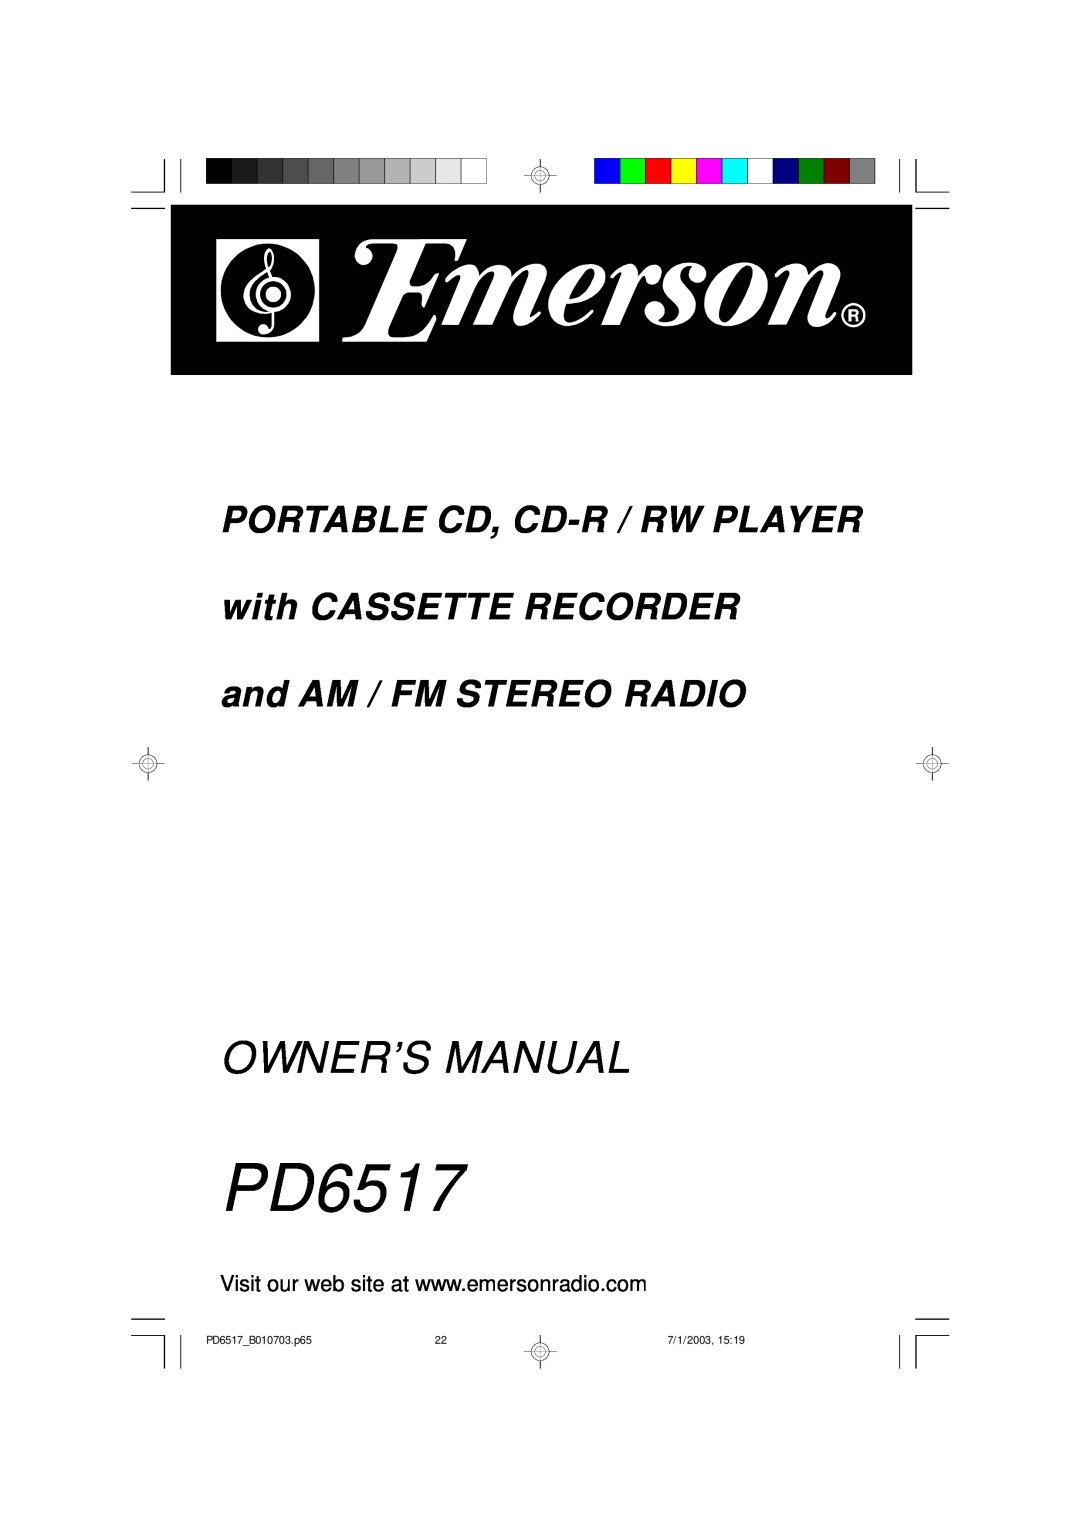 Emerson PD6517 owner manual Owner’S Manual, PORTABLE CD, CD-R / RW PLAYER with CASSETTE RECORDER, and AM / FM STEREO RADIO 